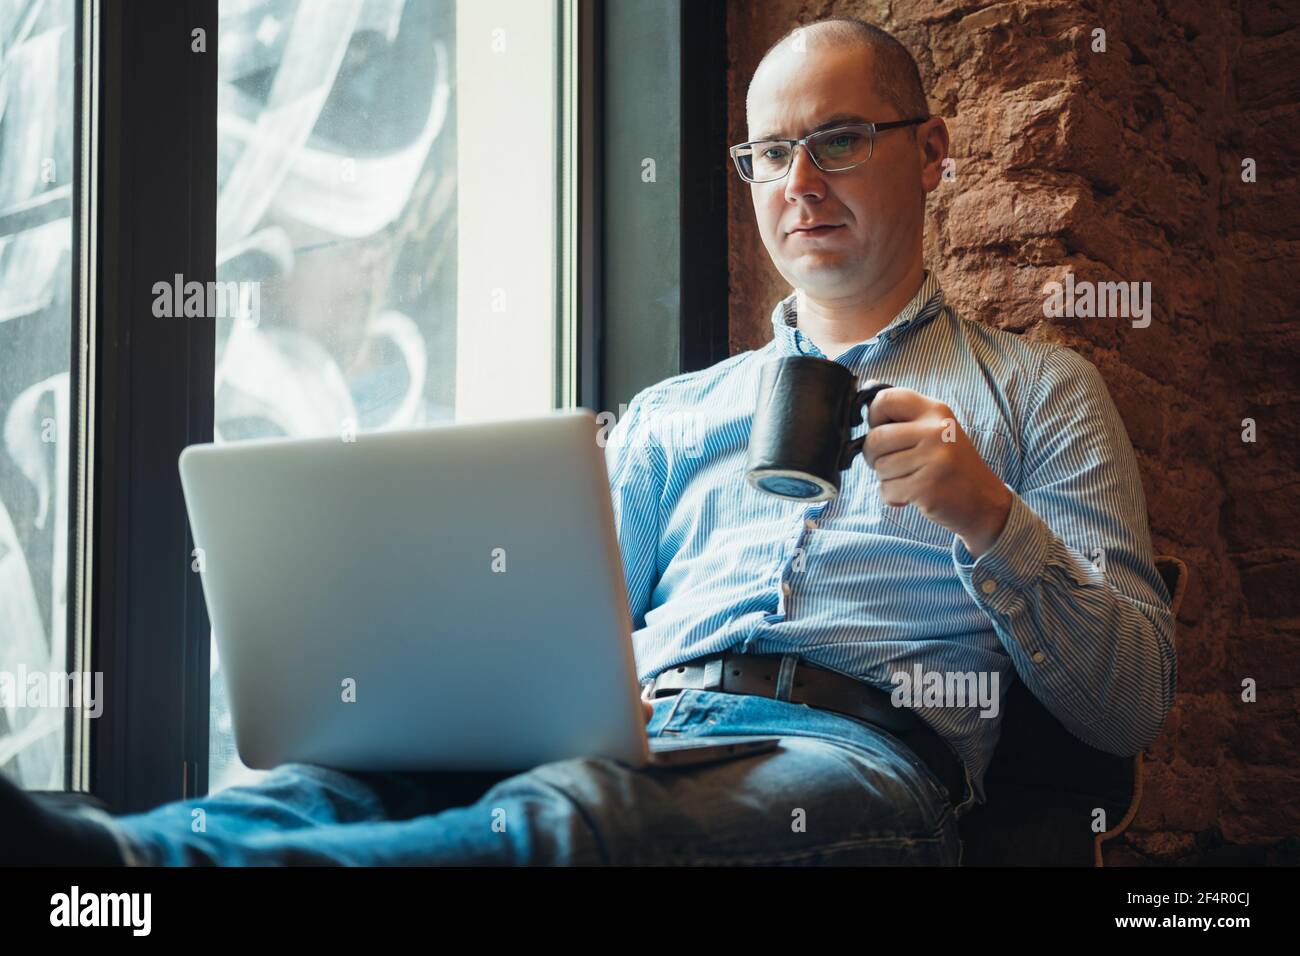 Man in a blue shirt working at home using laptop near the window. Remote work, online job, work from home. Stock Photo